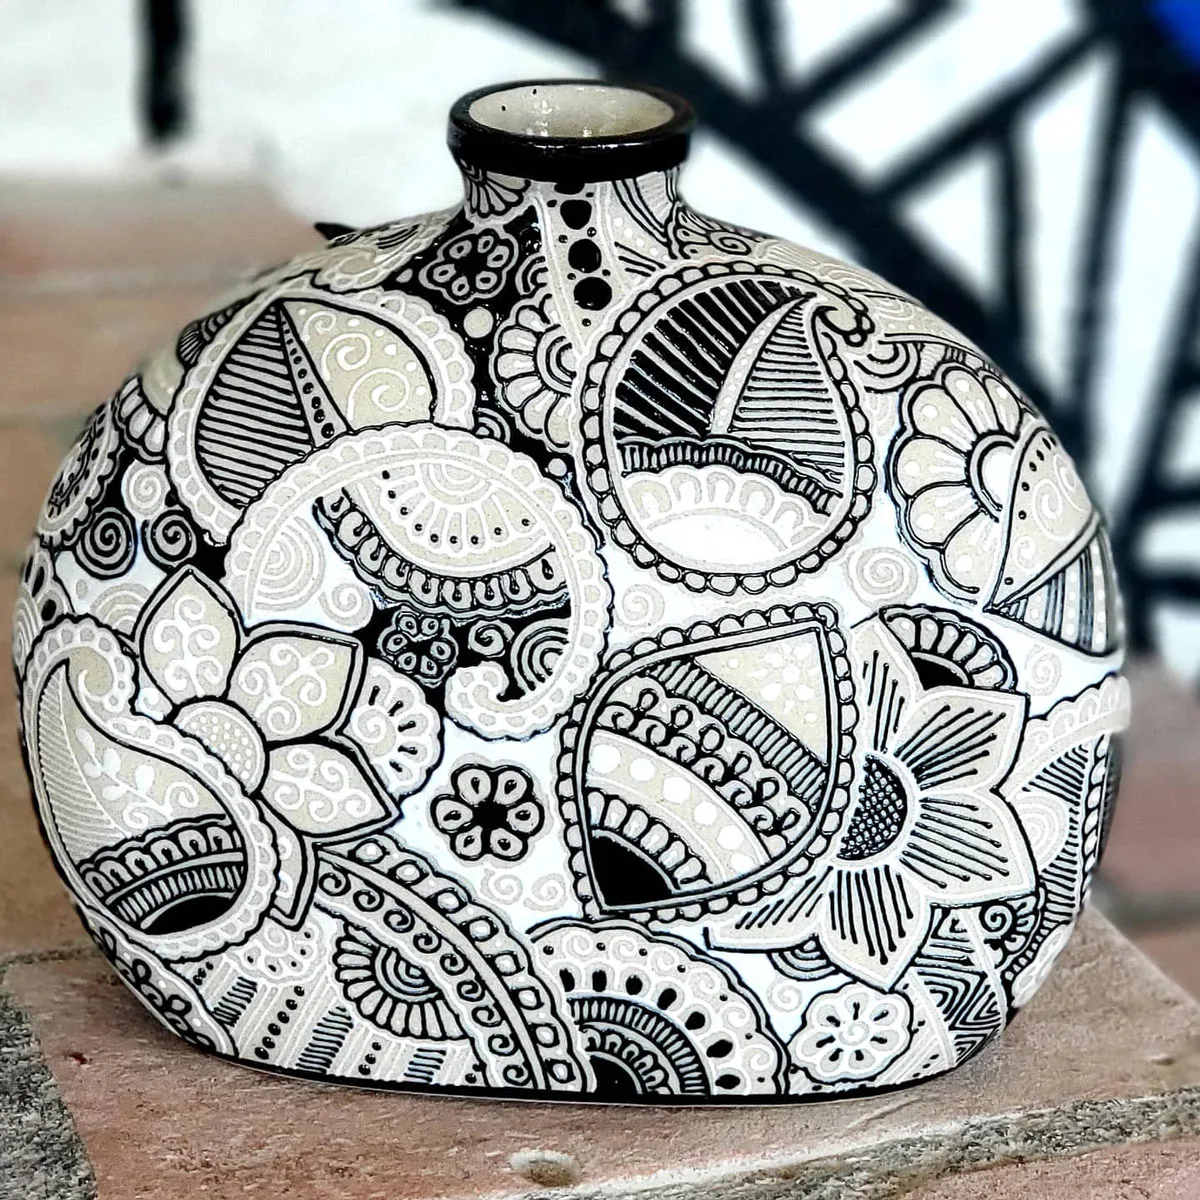 A beautiful black-and-white pottery vase at Cobalto Pottery and Tile Shop in Cabo San Lucas